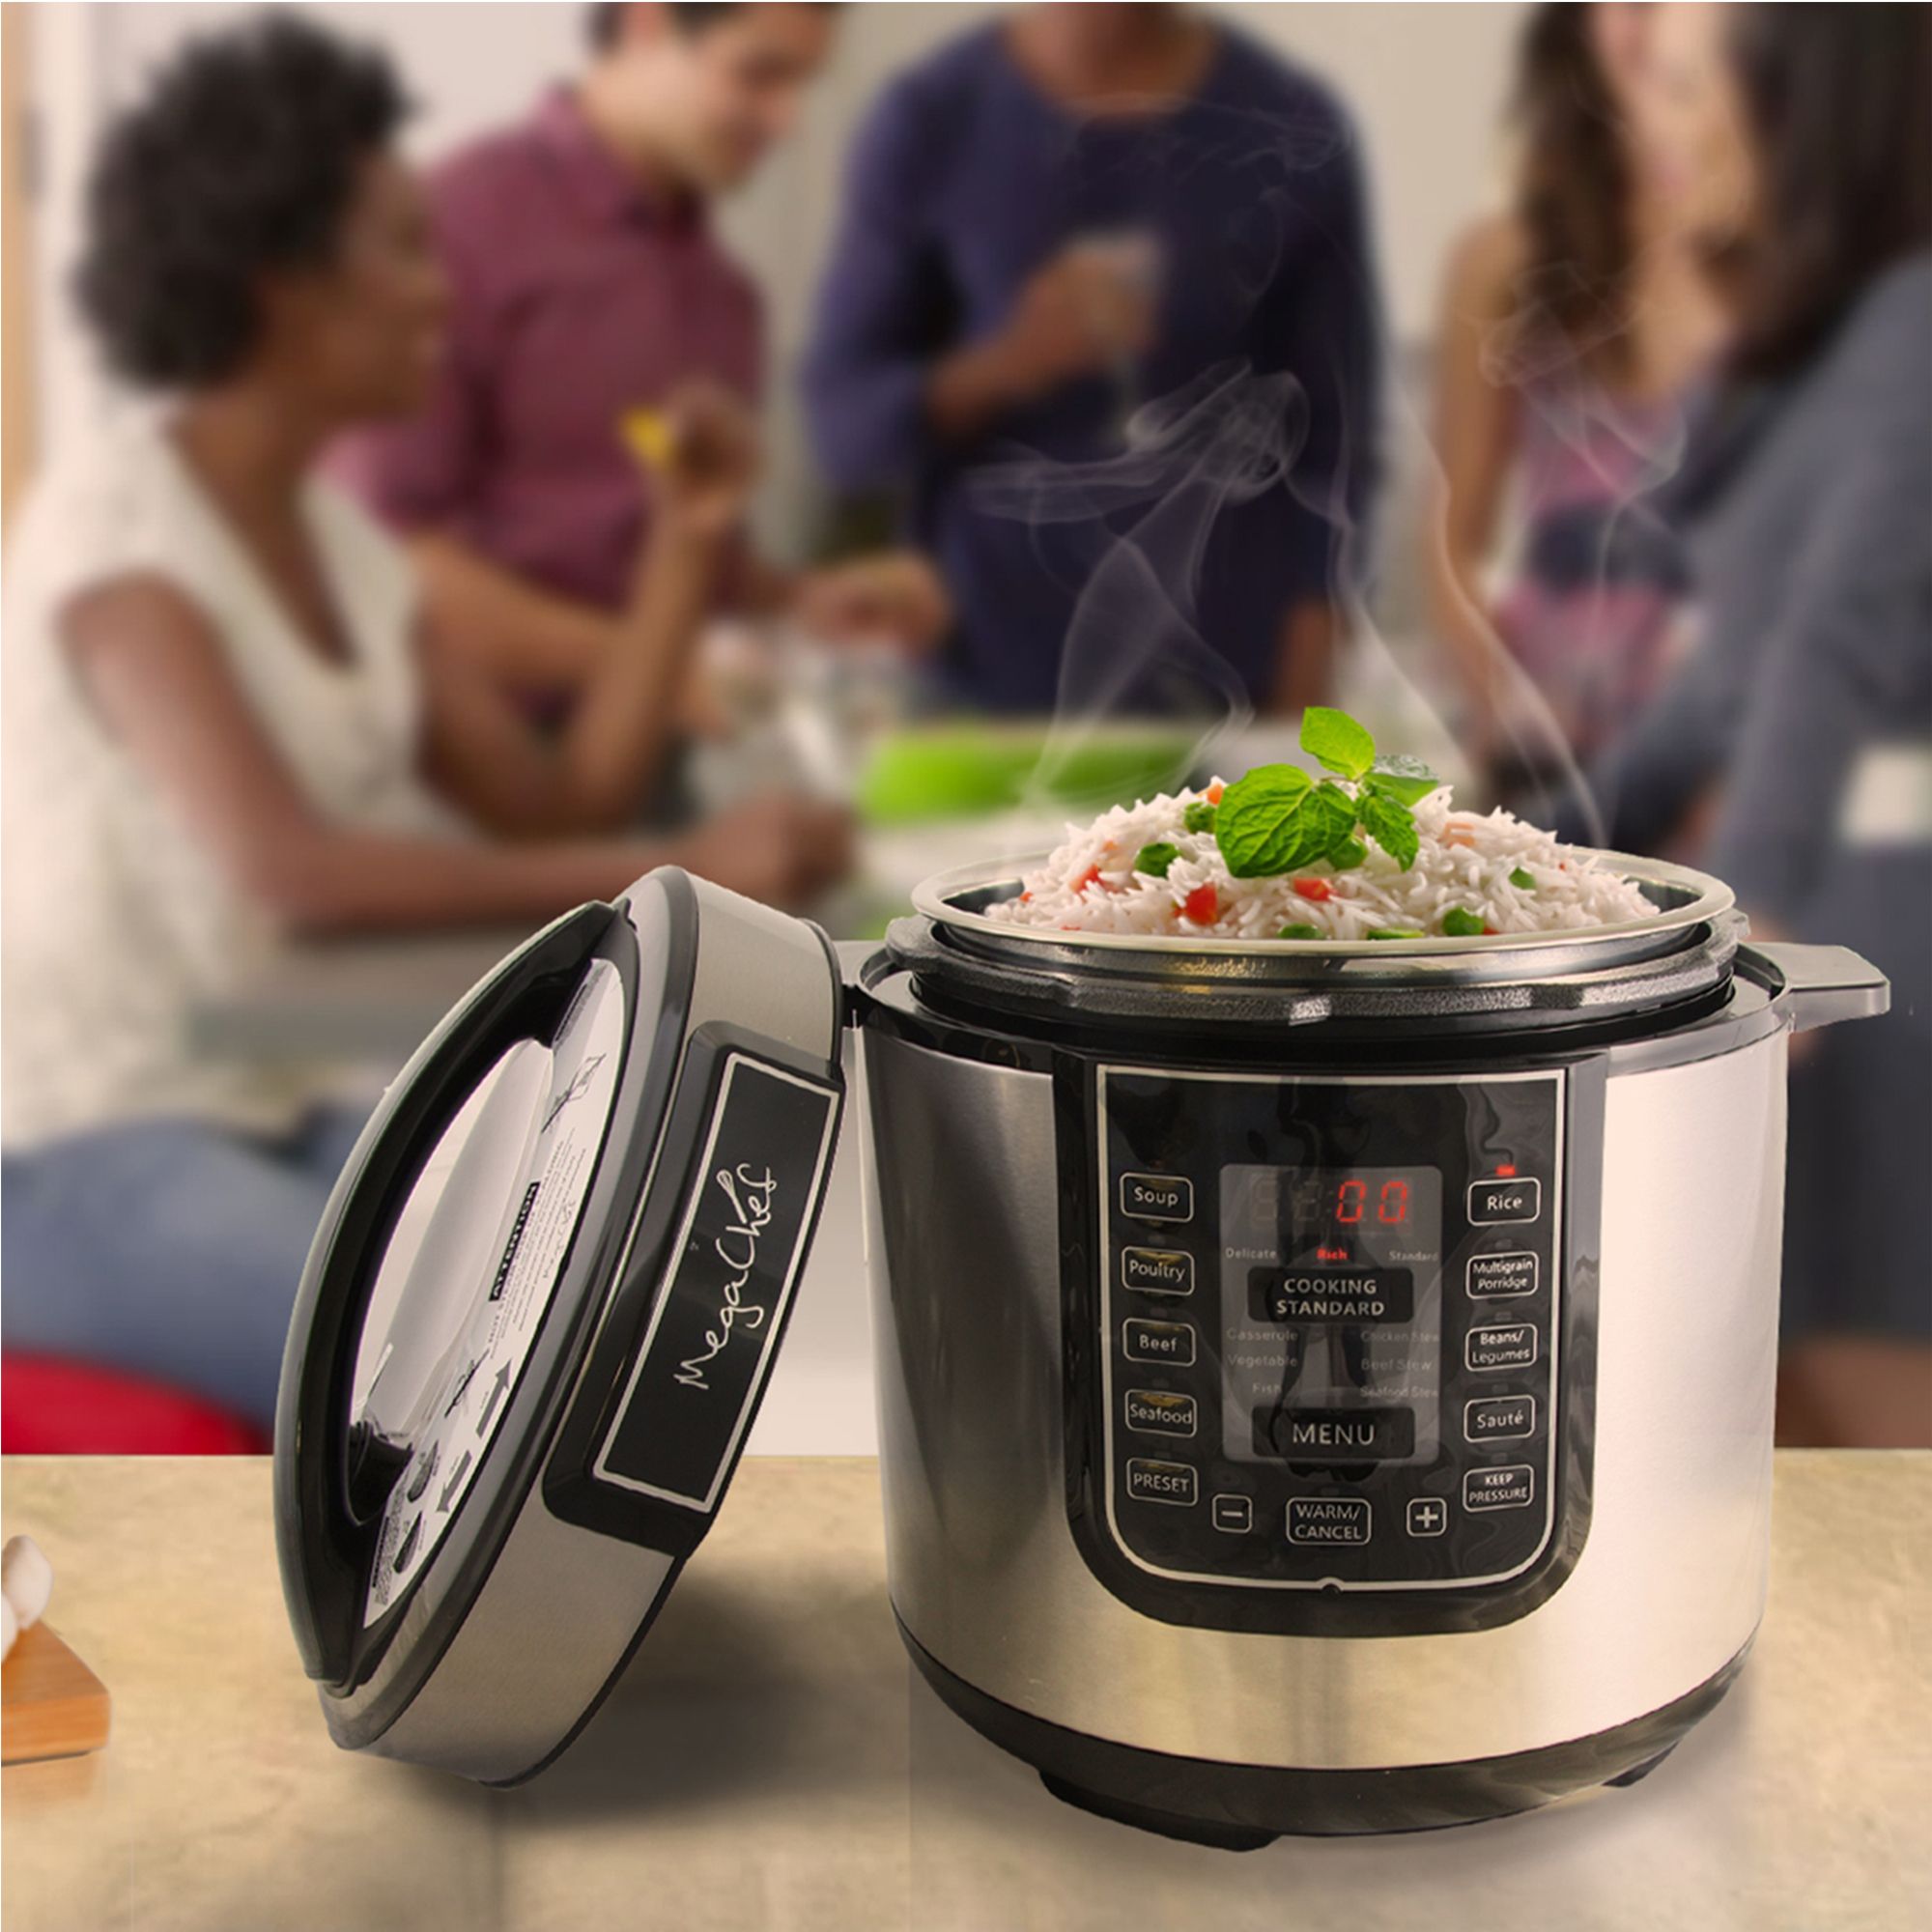 How to Use an Electric Pressure Canner (Digital Pressure Canner)